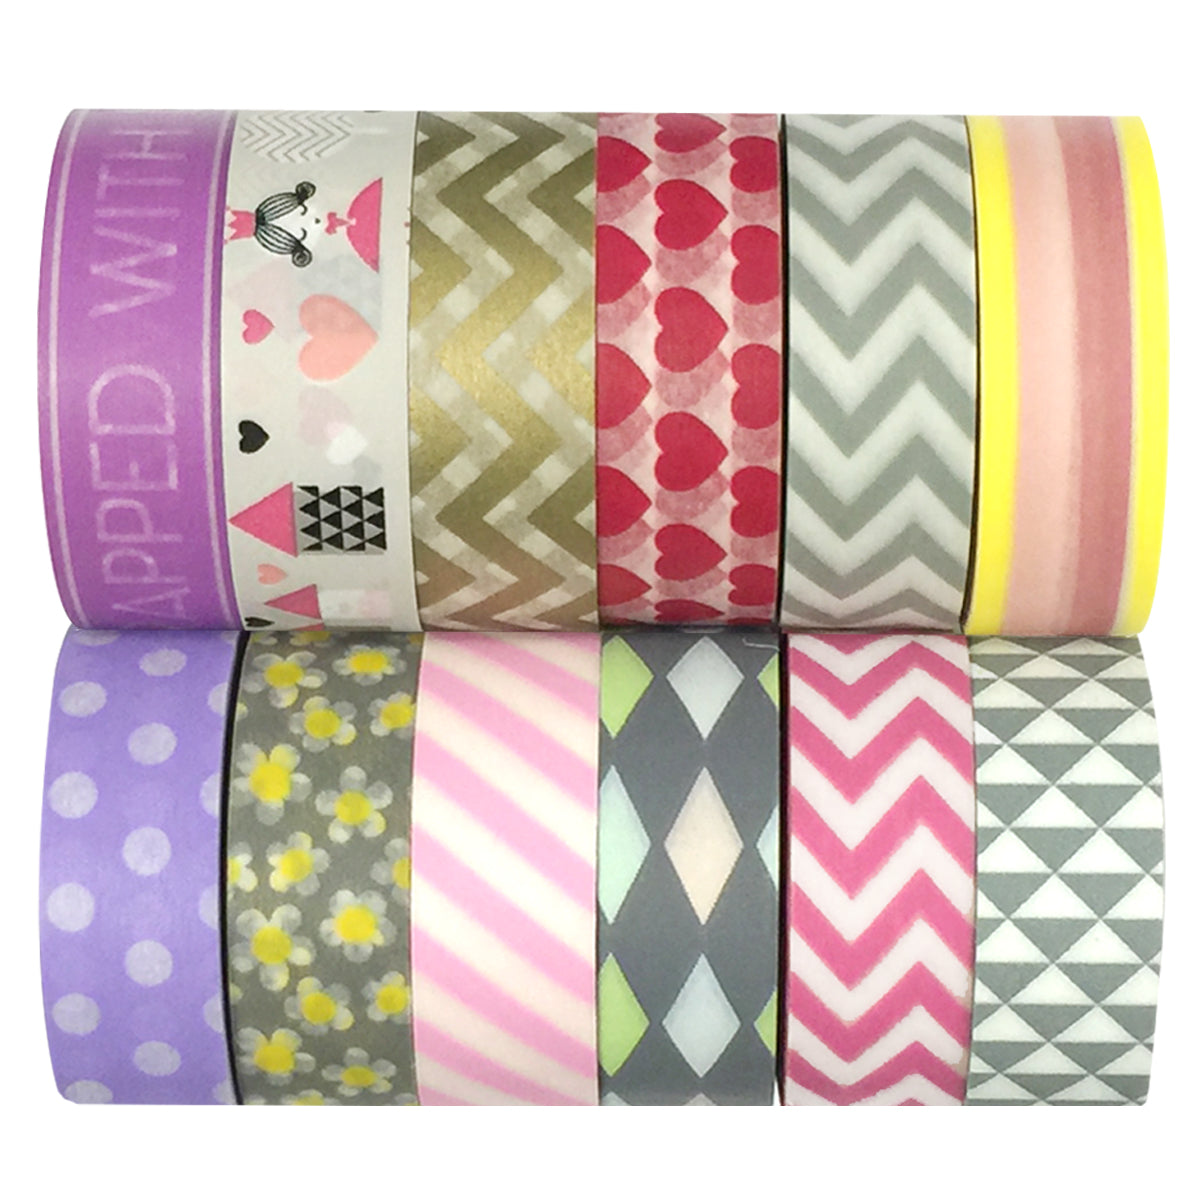 Wrapables Colorful Washi Masking Tape, Golden Pineapple Pink